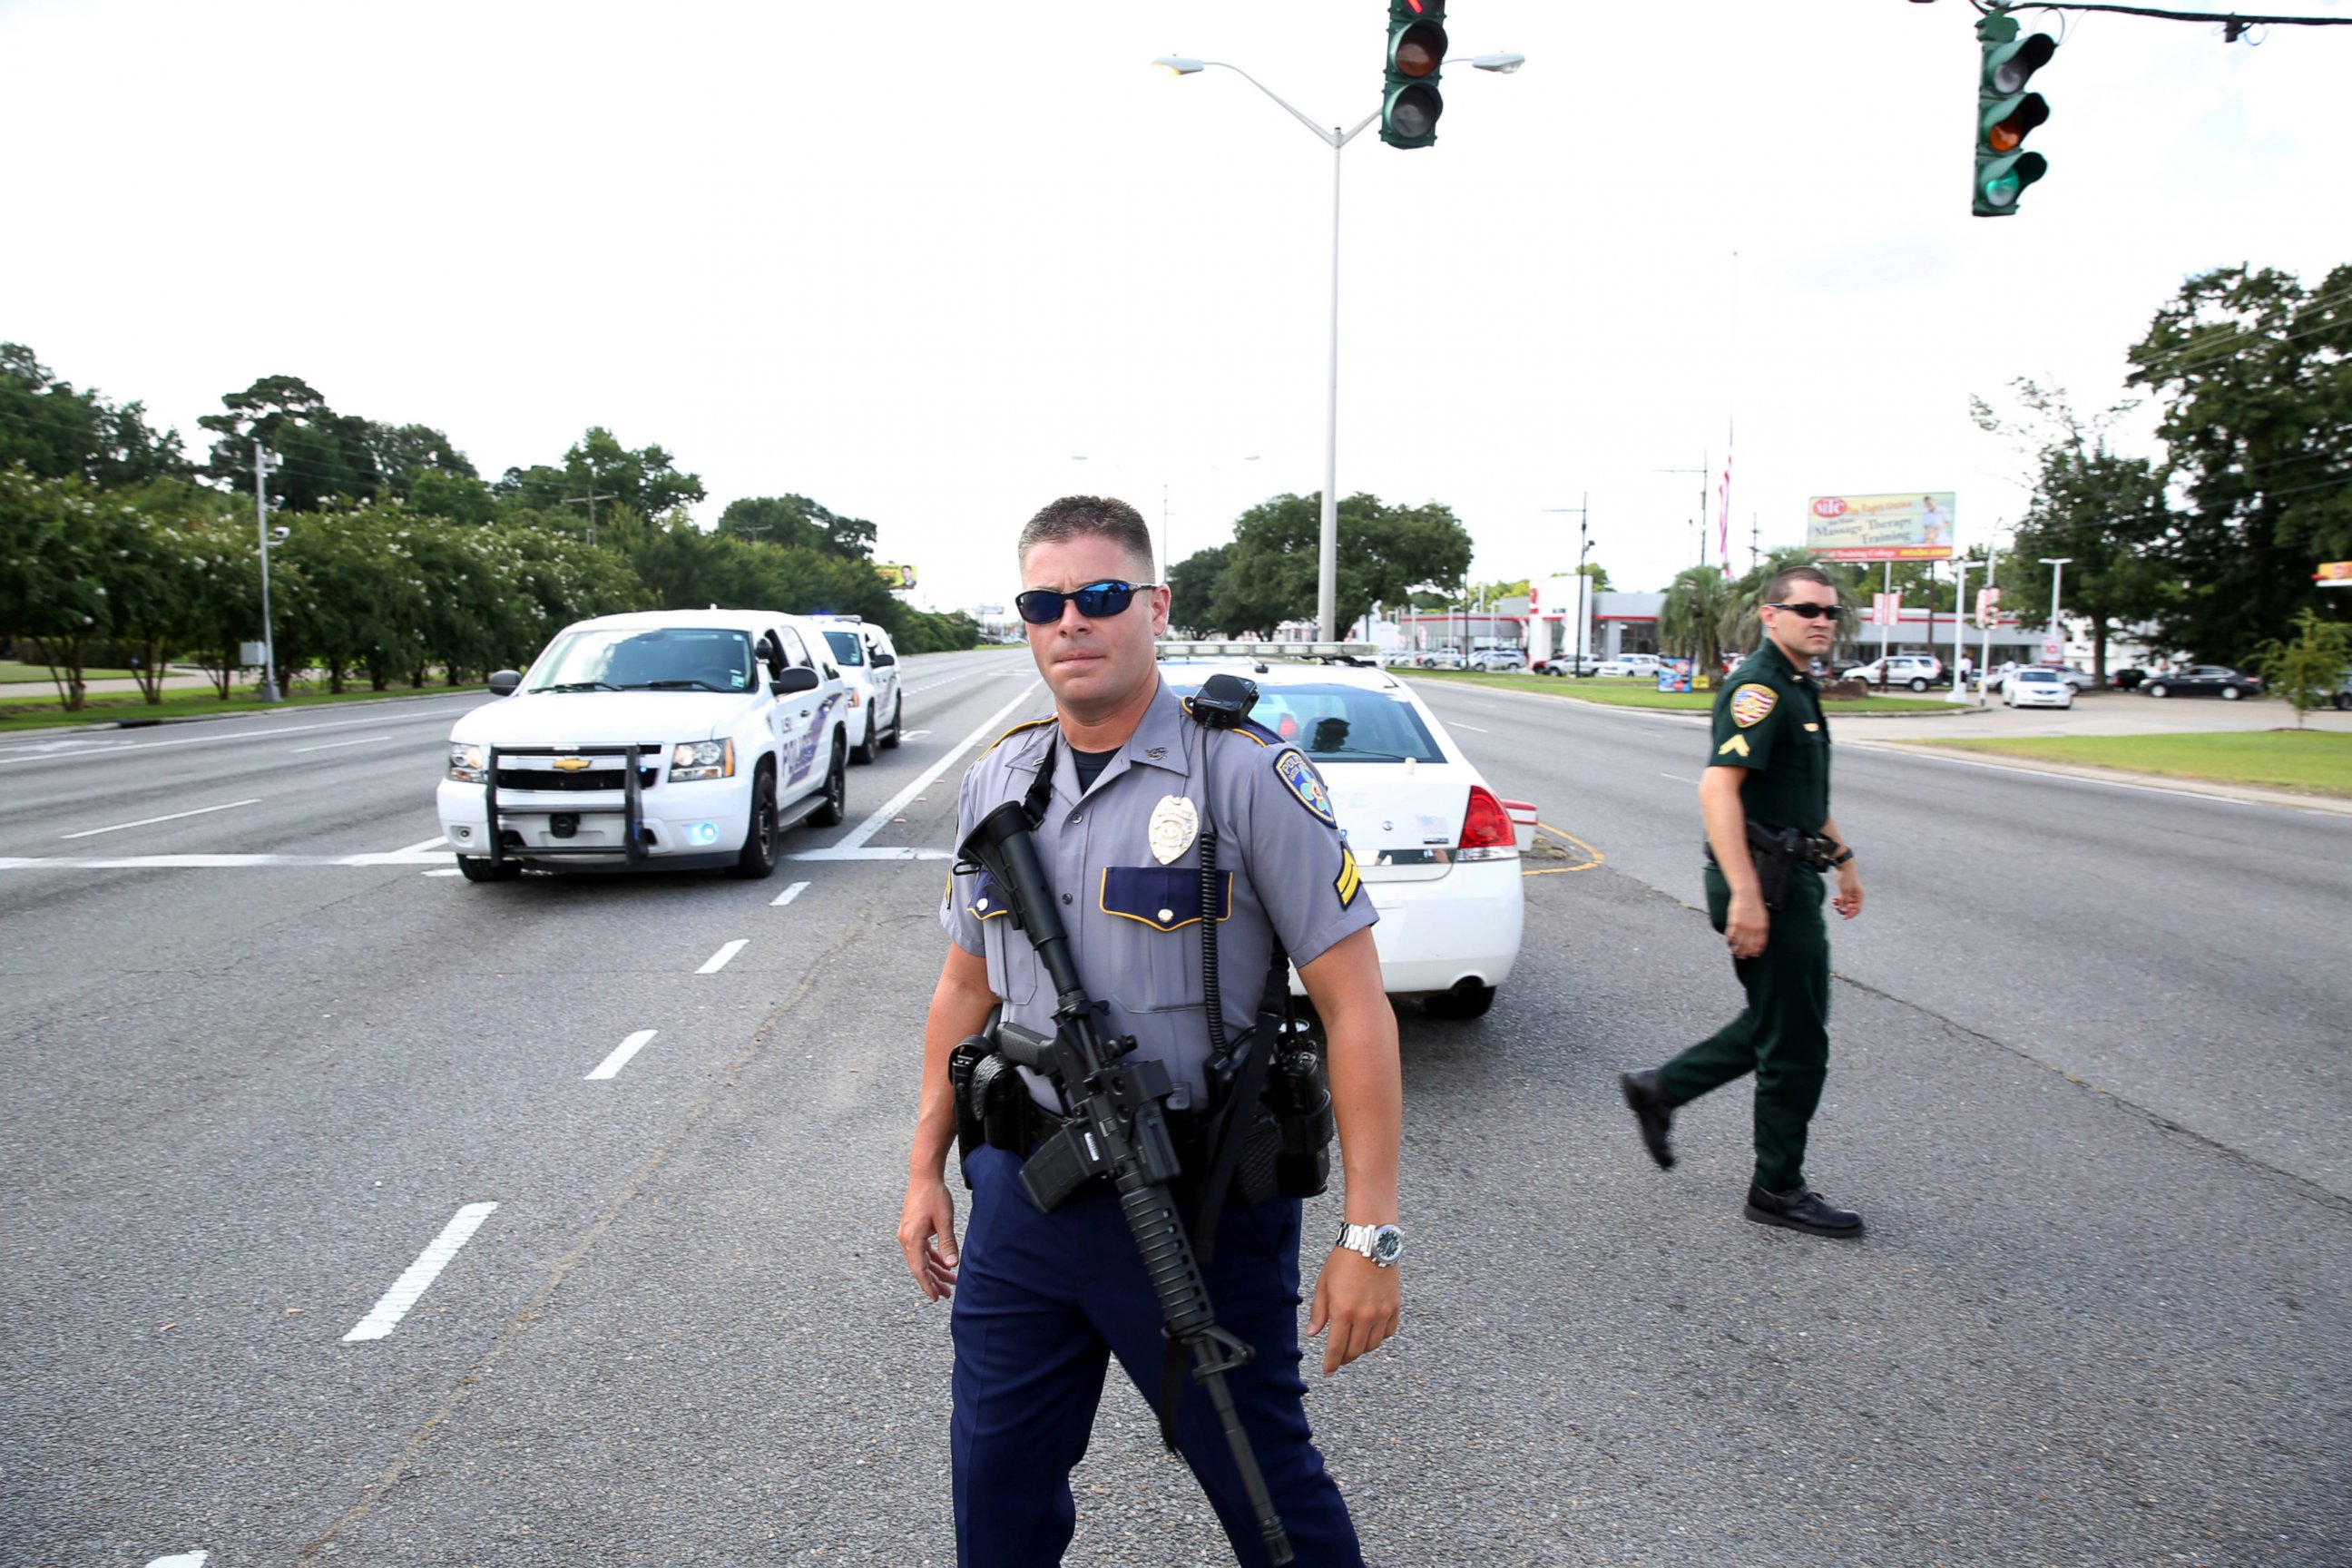 PHOTO: Police officers block off a road after a shooting of police in Baton Rouge, Louisiana, July 17, 2016. 